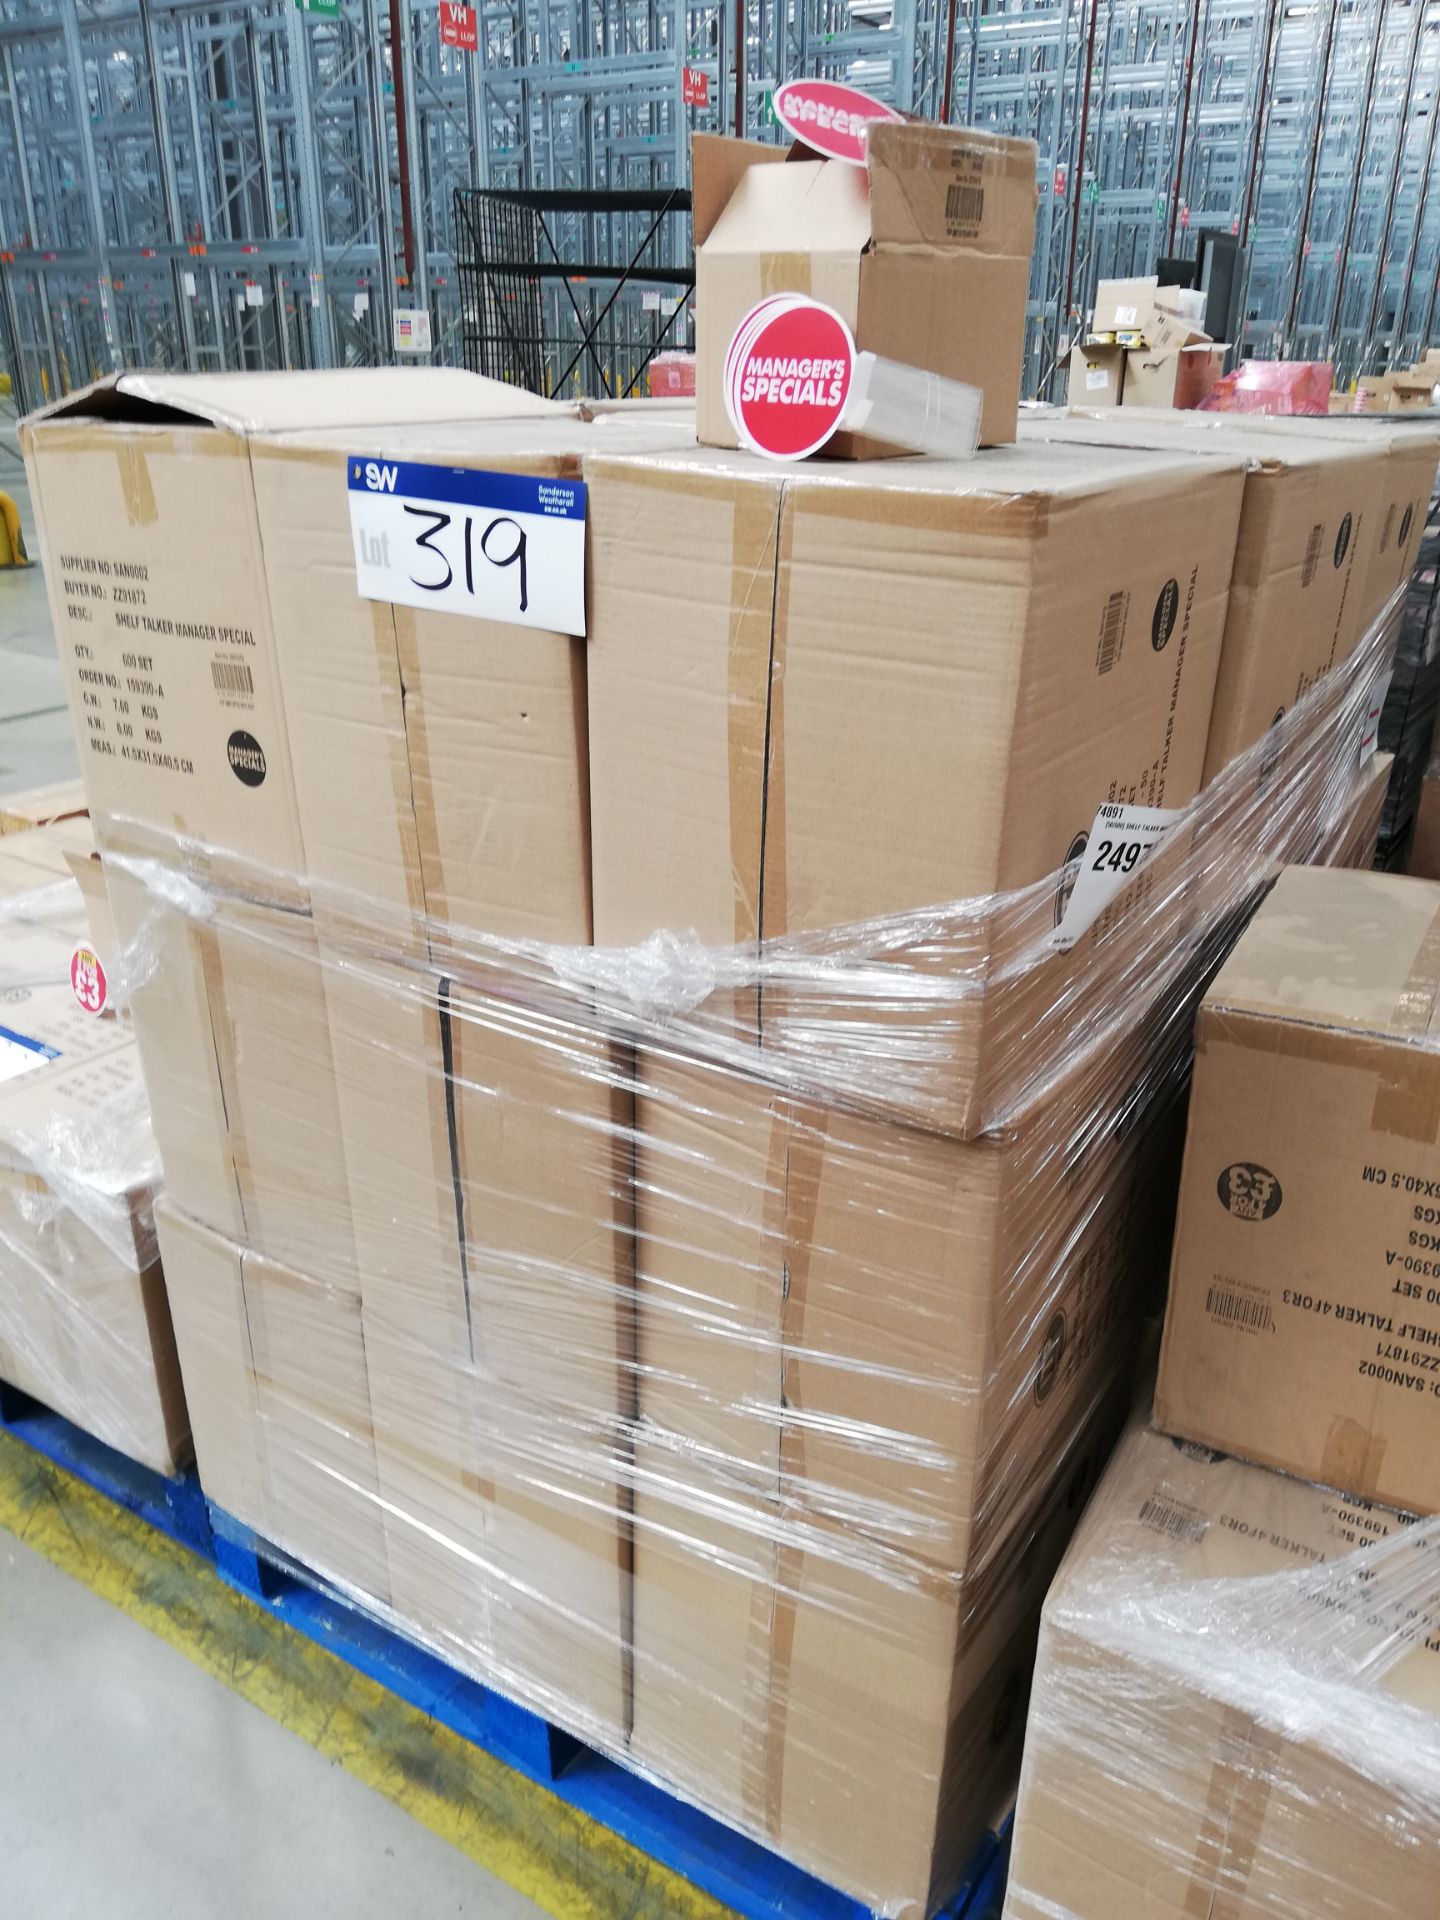 10,800 x Shelf Talkers ‘Managers Special’ (Boxed)